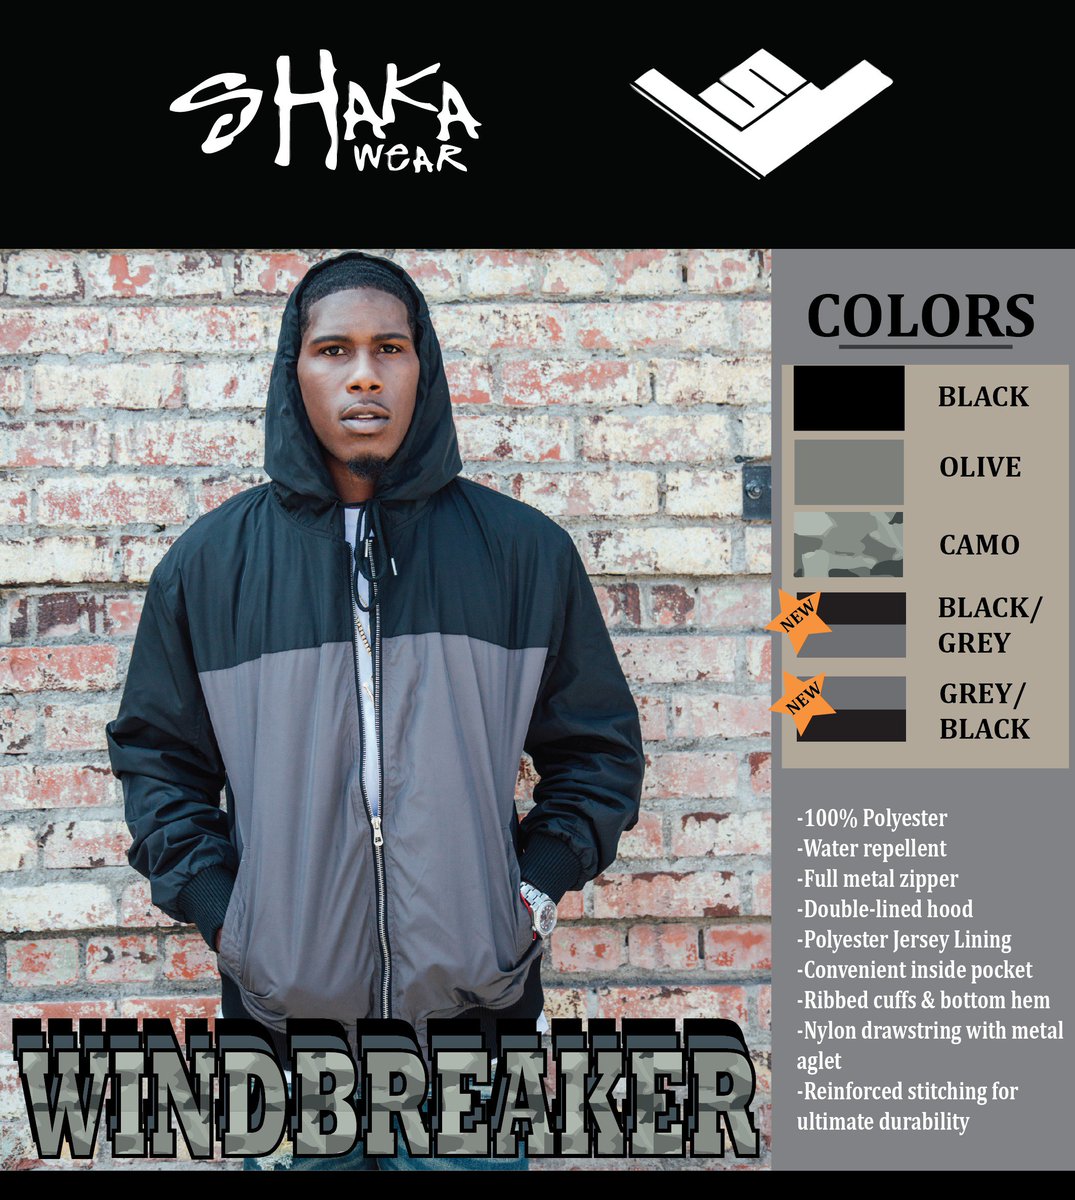 Windbreaker Jackets now available! Catch the breeze in style with a variety of colors! While supplies last. #shakawear #windbreaker #urban